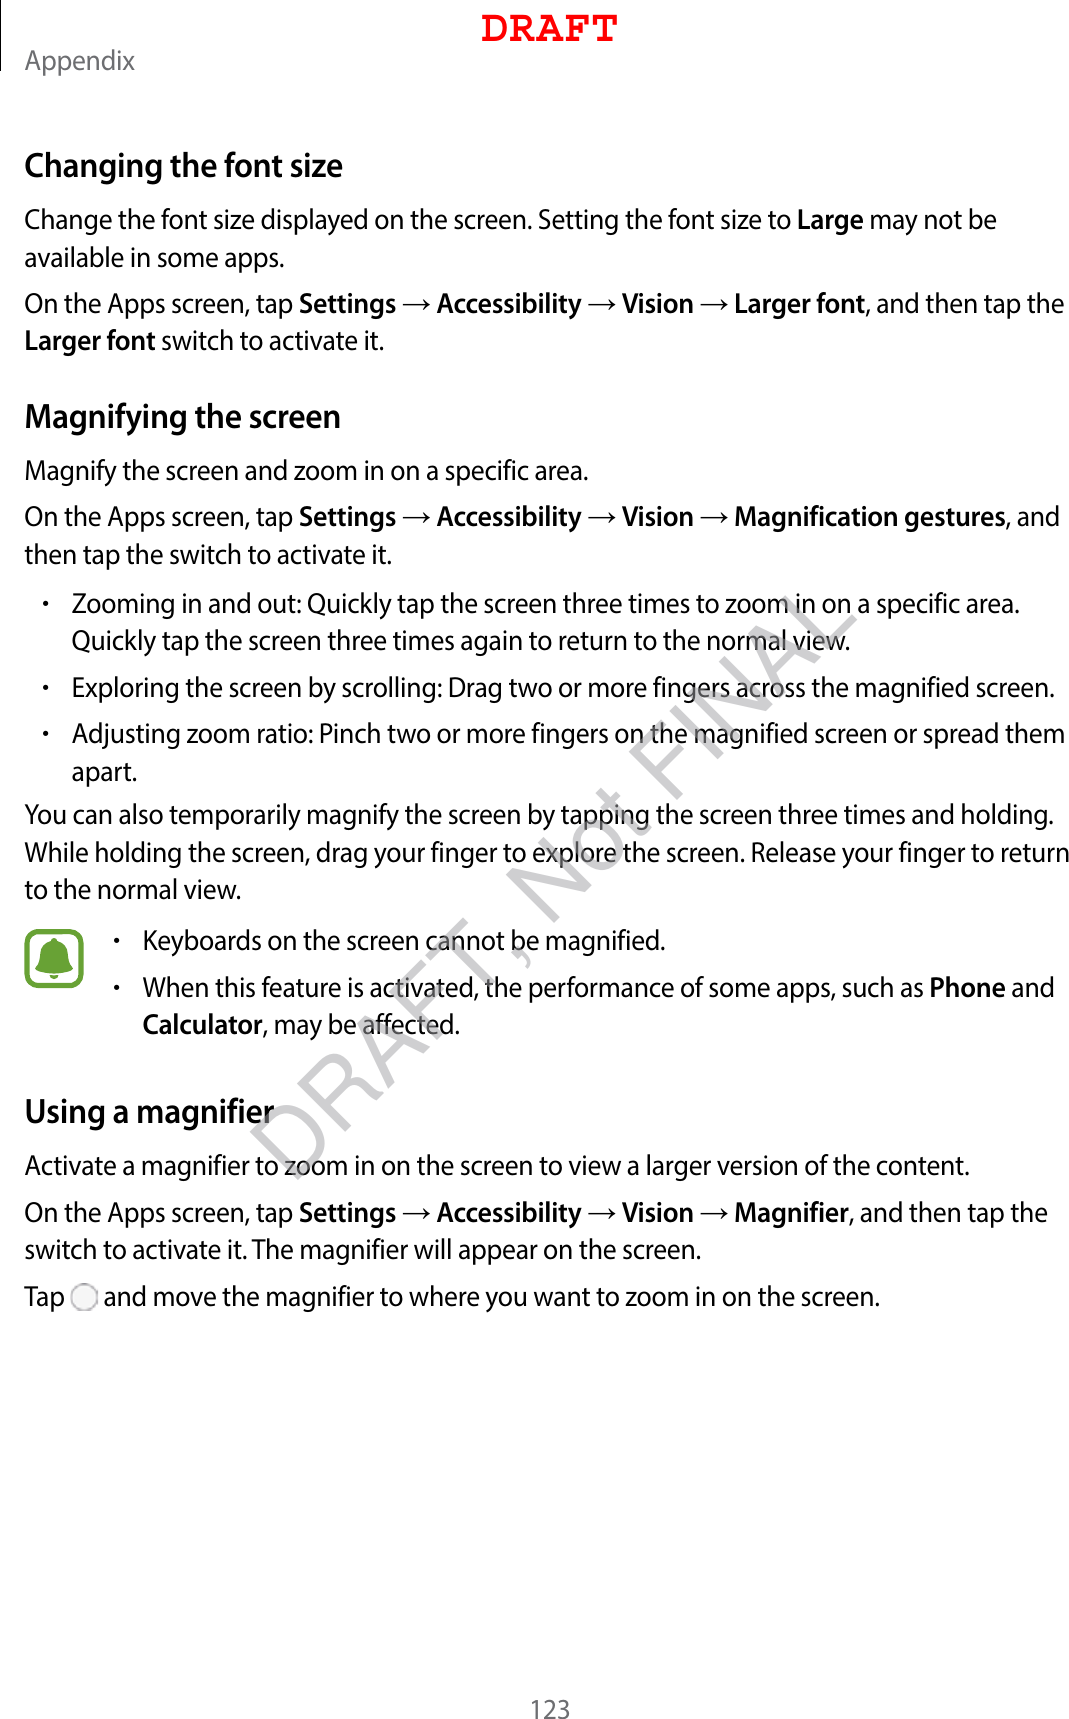 Appendix123Changing the font sizeChange the font size displayed on the screen. Setting the font size to Large may not be available in some apps.On the Apps screen, tap Settings  Accessibility  Vision  Larger font, and then tap the Larger font switch to activate it.Magnifying the screenMagnify the screen and zoom in on a specific area.On the Apps screen, tap Settings  Accessibility  Vision  Magnification gestures, and then tap the switch to activate it.•Zooming in and out: Quickly tap the screen three times to zoom in on a specific area. Quickly tap the screen three times again to return to the normal view.•Exploring the screen by scrolling: Drag two or more fingers across the magnified screen.•Adjusting zoom ratio: Pinch two or more fingers on the magnified screen or spread them apart.You can also temporarily magnify the screen by tapping the screen three times and holding. While holding the screen, drag your finger to explore the screen. Release your finger to return to the normal view.•Keyboards on the screen cannot be magnified.•When this feature is activated, the performance of some apps, such as Phone and Calculator, may be affected.Using a magnifierActivate a magnifier to zoom in on the screen to view a larger version of the content.On the Apps screen, tap Settings  Accessibility  Vision  Magnifier, and then tap the switch to activate it. The magnifier will appear on the screen.Tap   and move the magnifier to where you want to zoom in on the screen.DRAFTDRAFT, Not FINAL